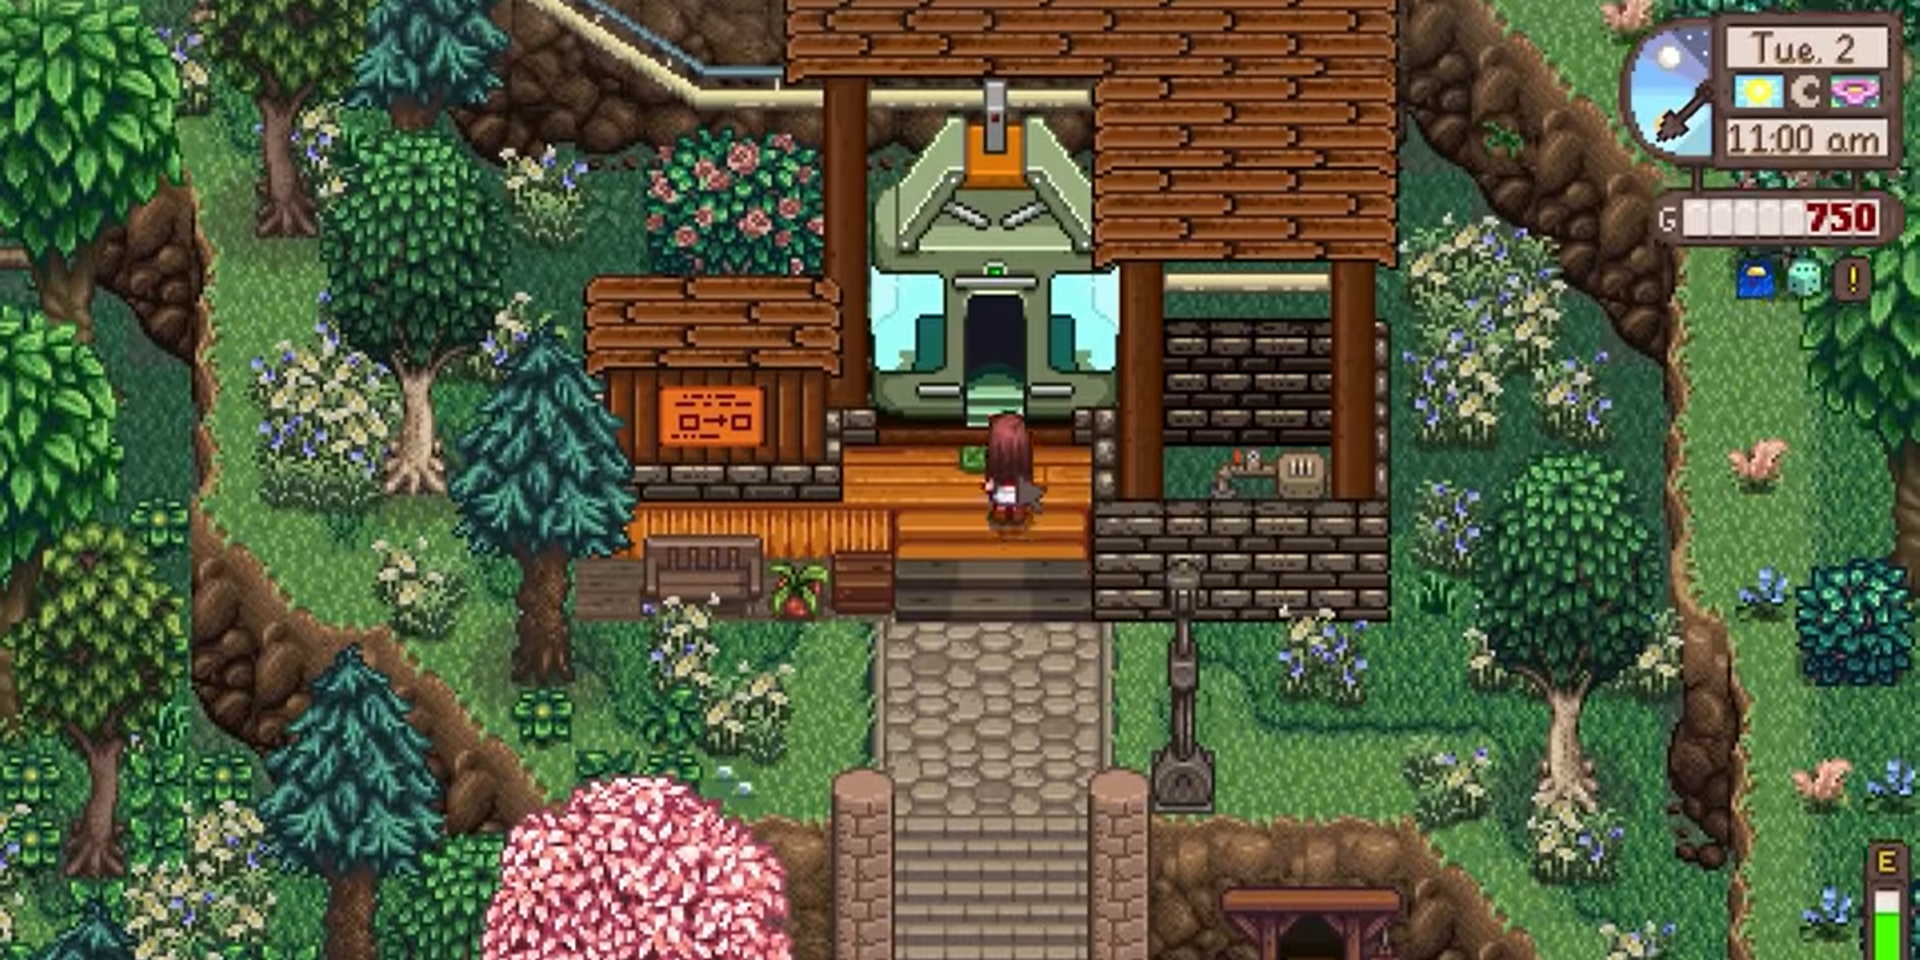 A farmer enters the cable car that brings them to Ridgeside Village. Around the platform, trees and grass cover the raised land around a centered stone path.